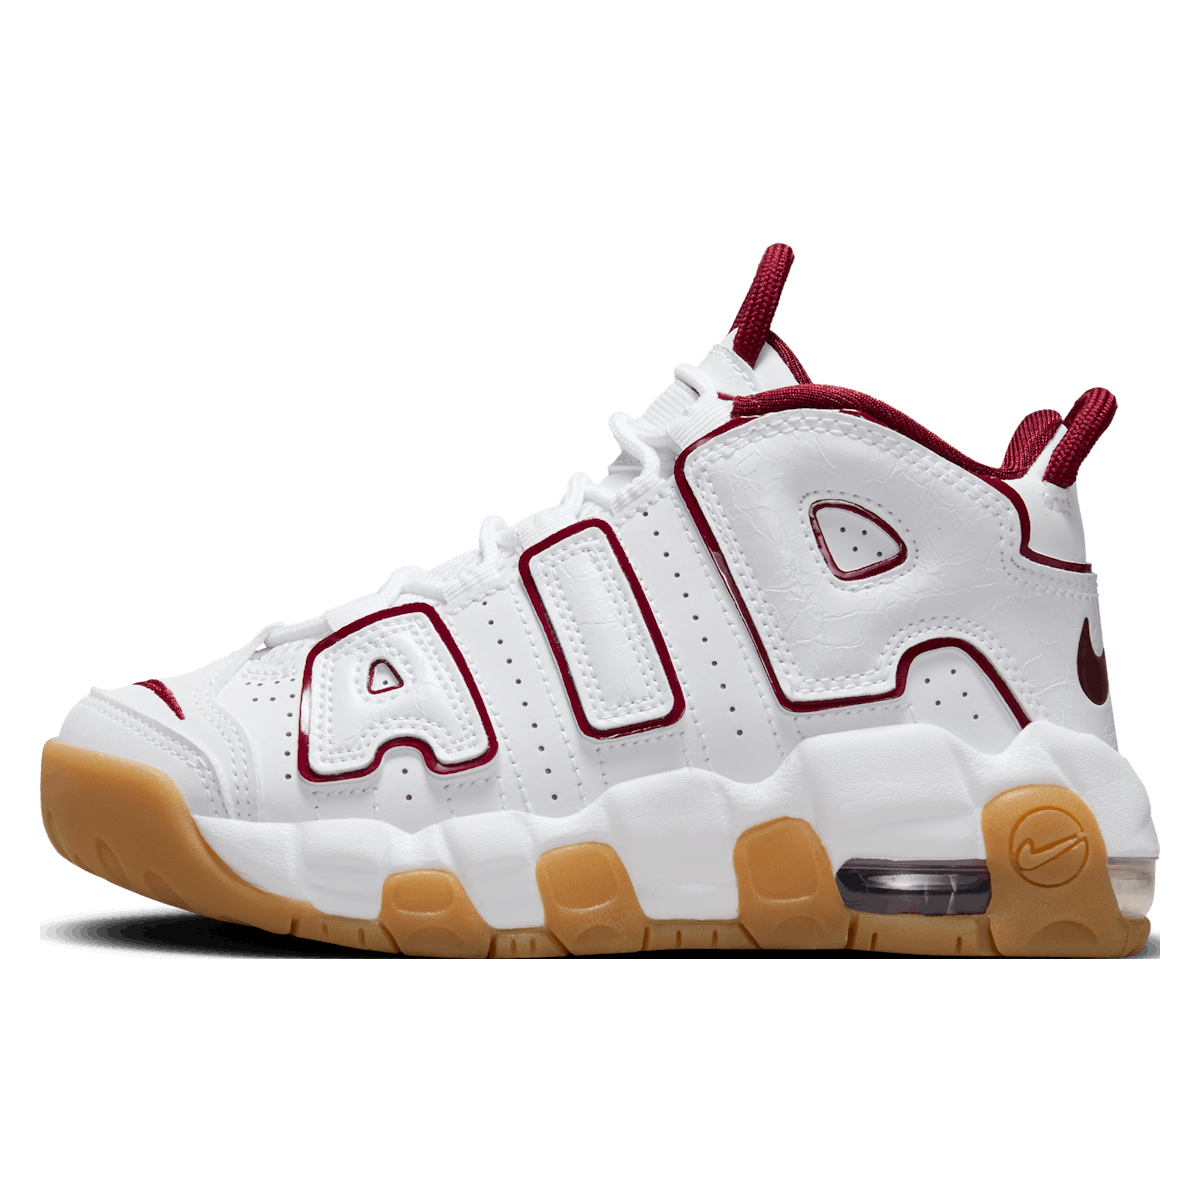 Nike Air More Uptempo PS "Gum Light Brown"